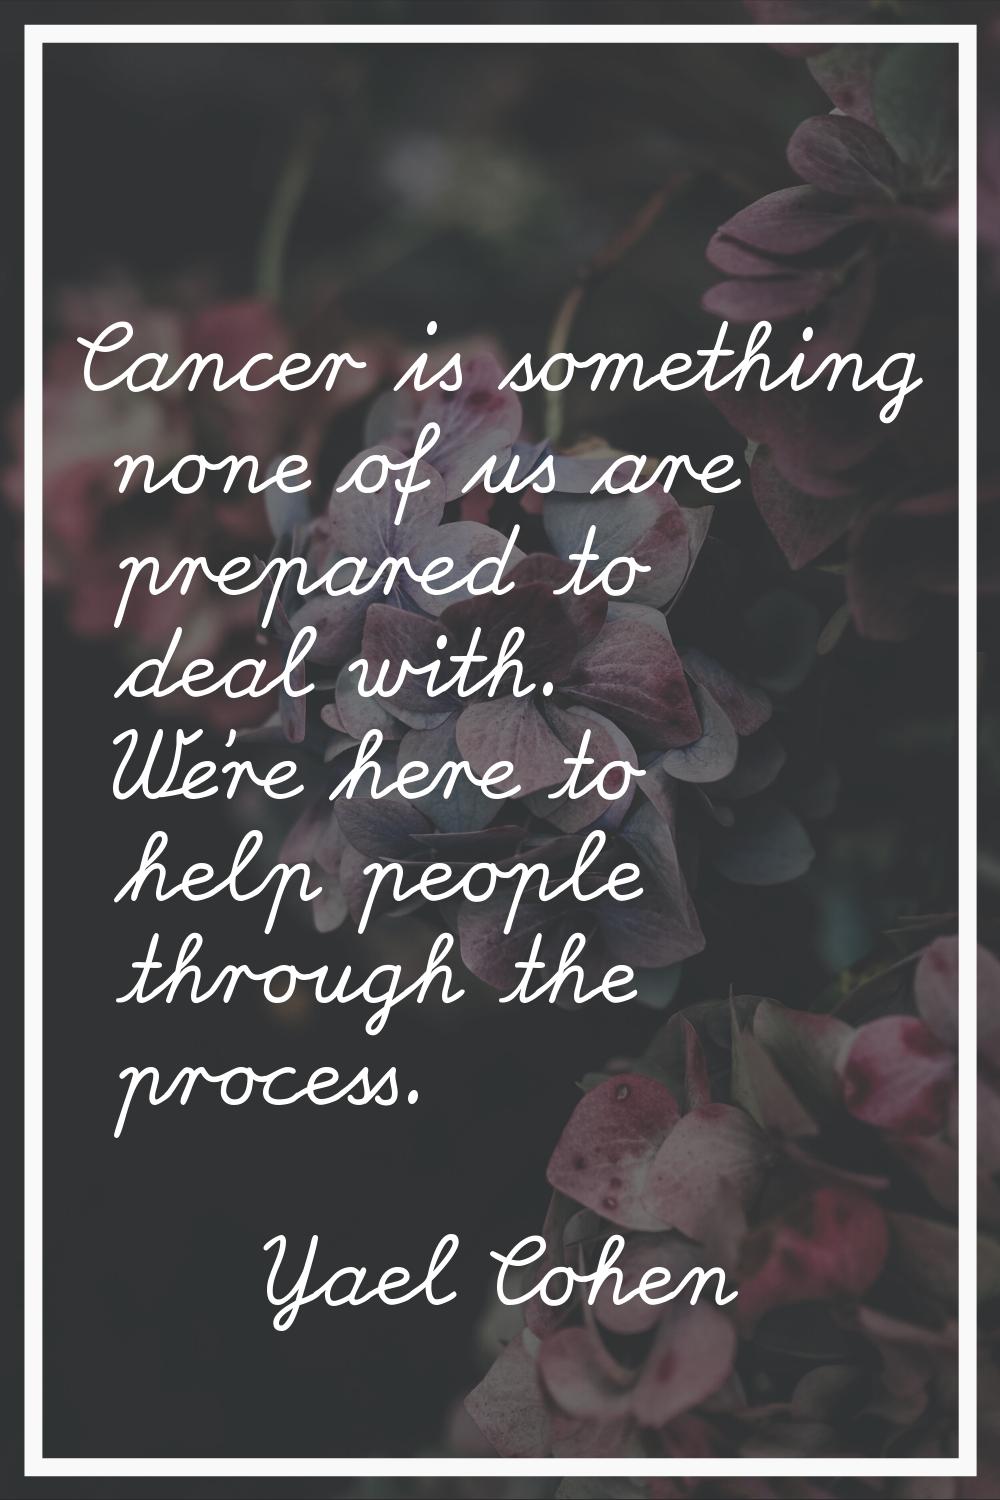 Cancer is something none of us are prepared to deal with. We're here to help people through the pro